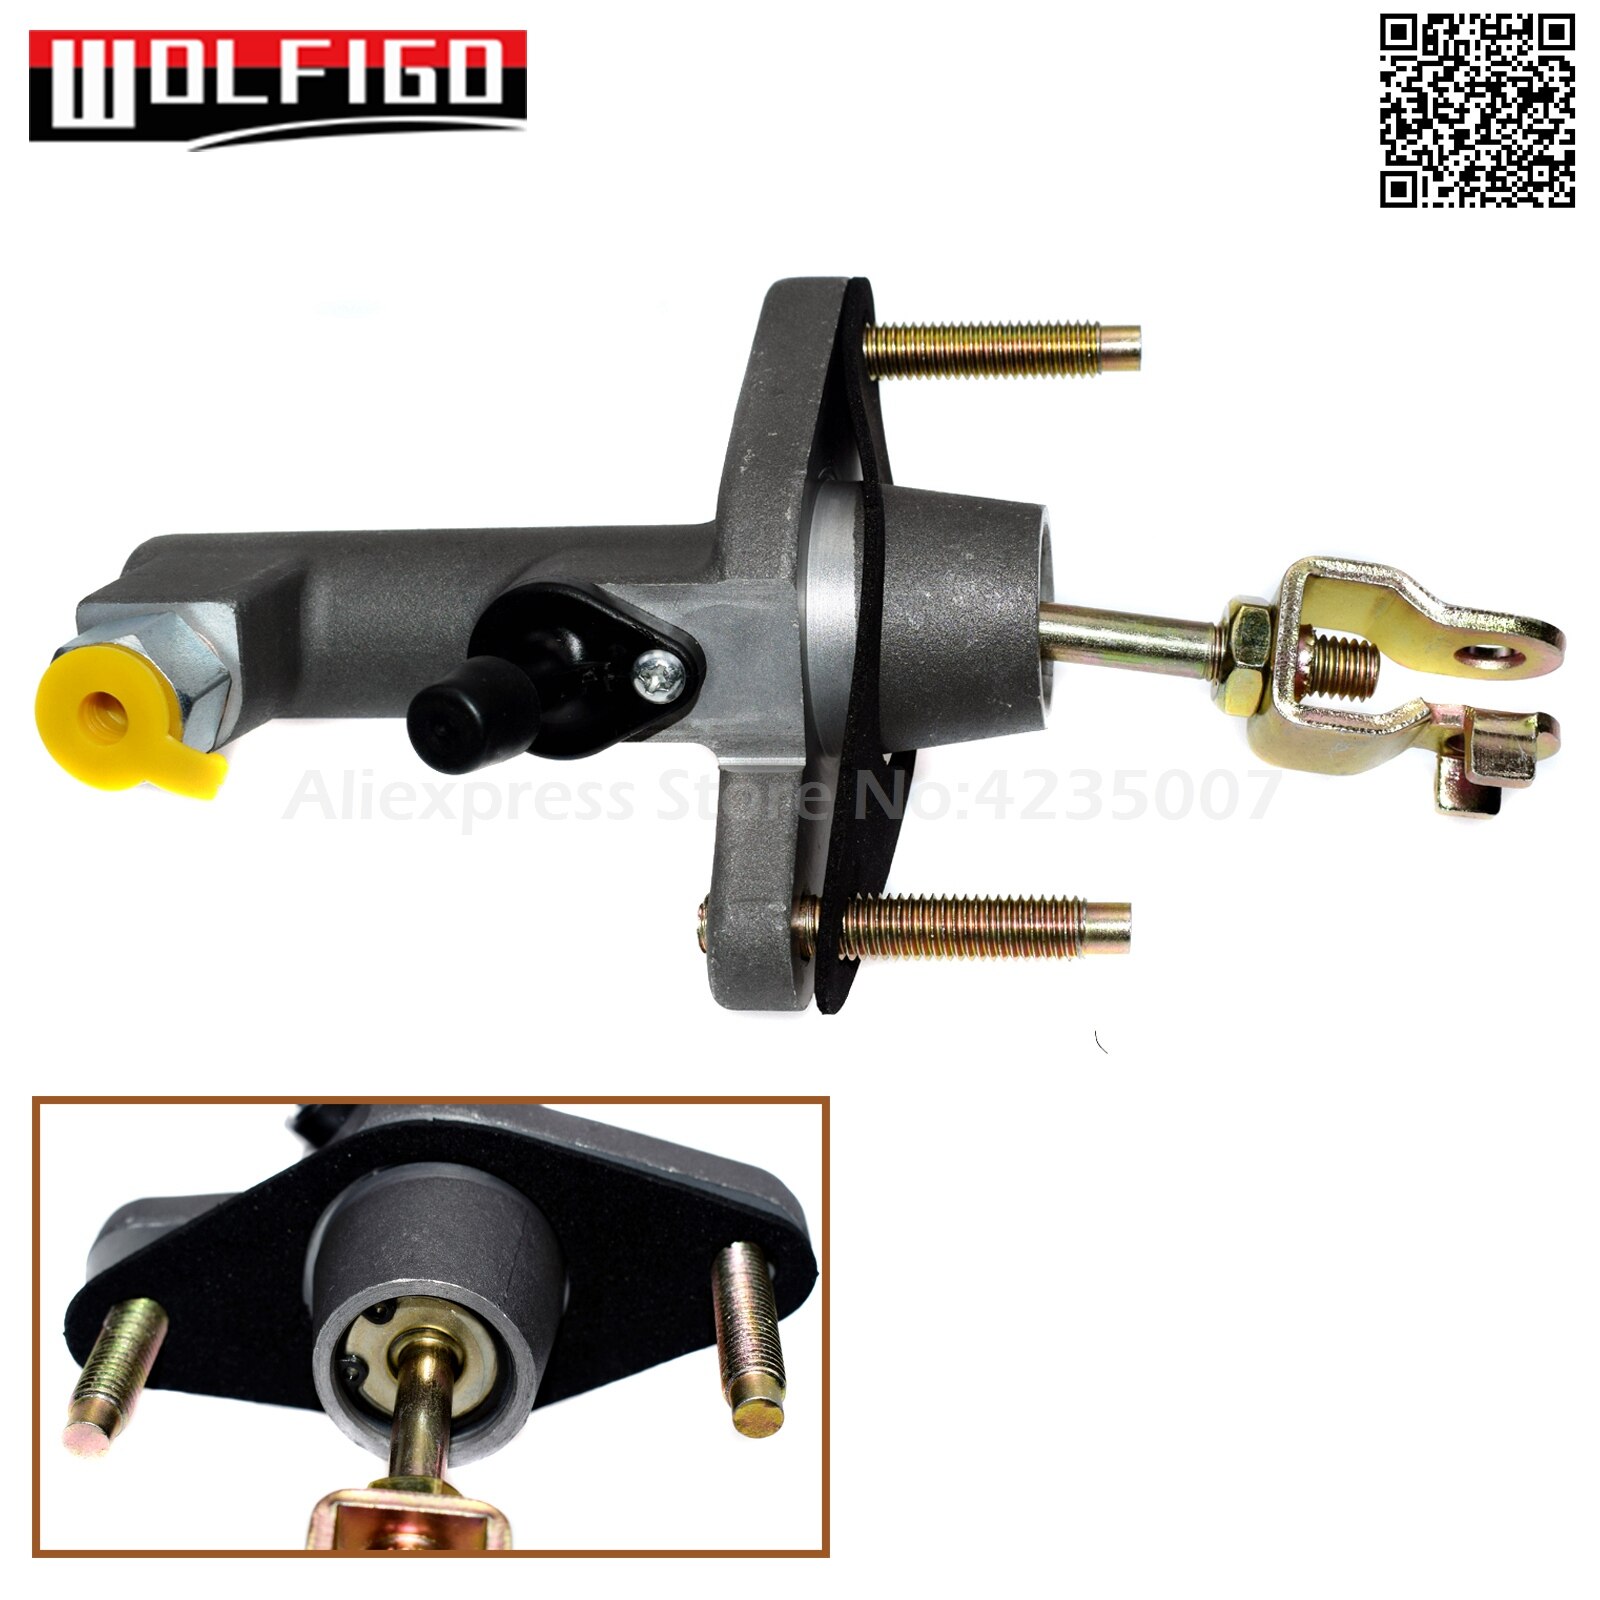 WOLFIGO New For Honda Civic 2001-05 1.7L Clutch Master Cylinder 46920-S5A-G03,6284600141,1202497,50053400,46920-S5A-G01,J2504024